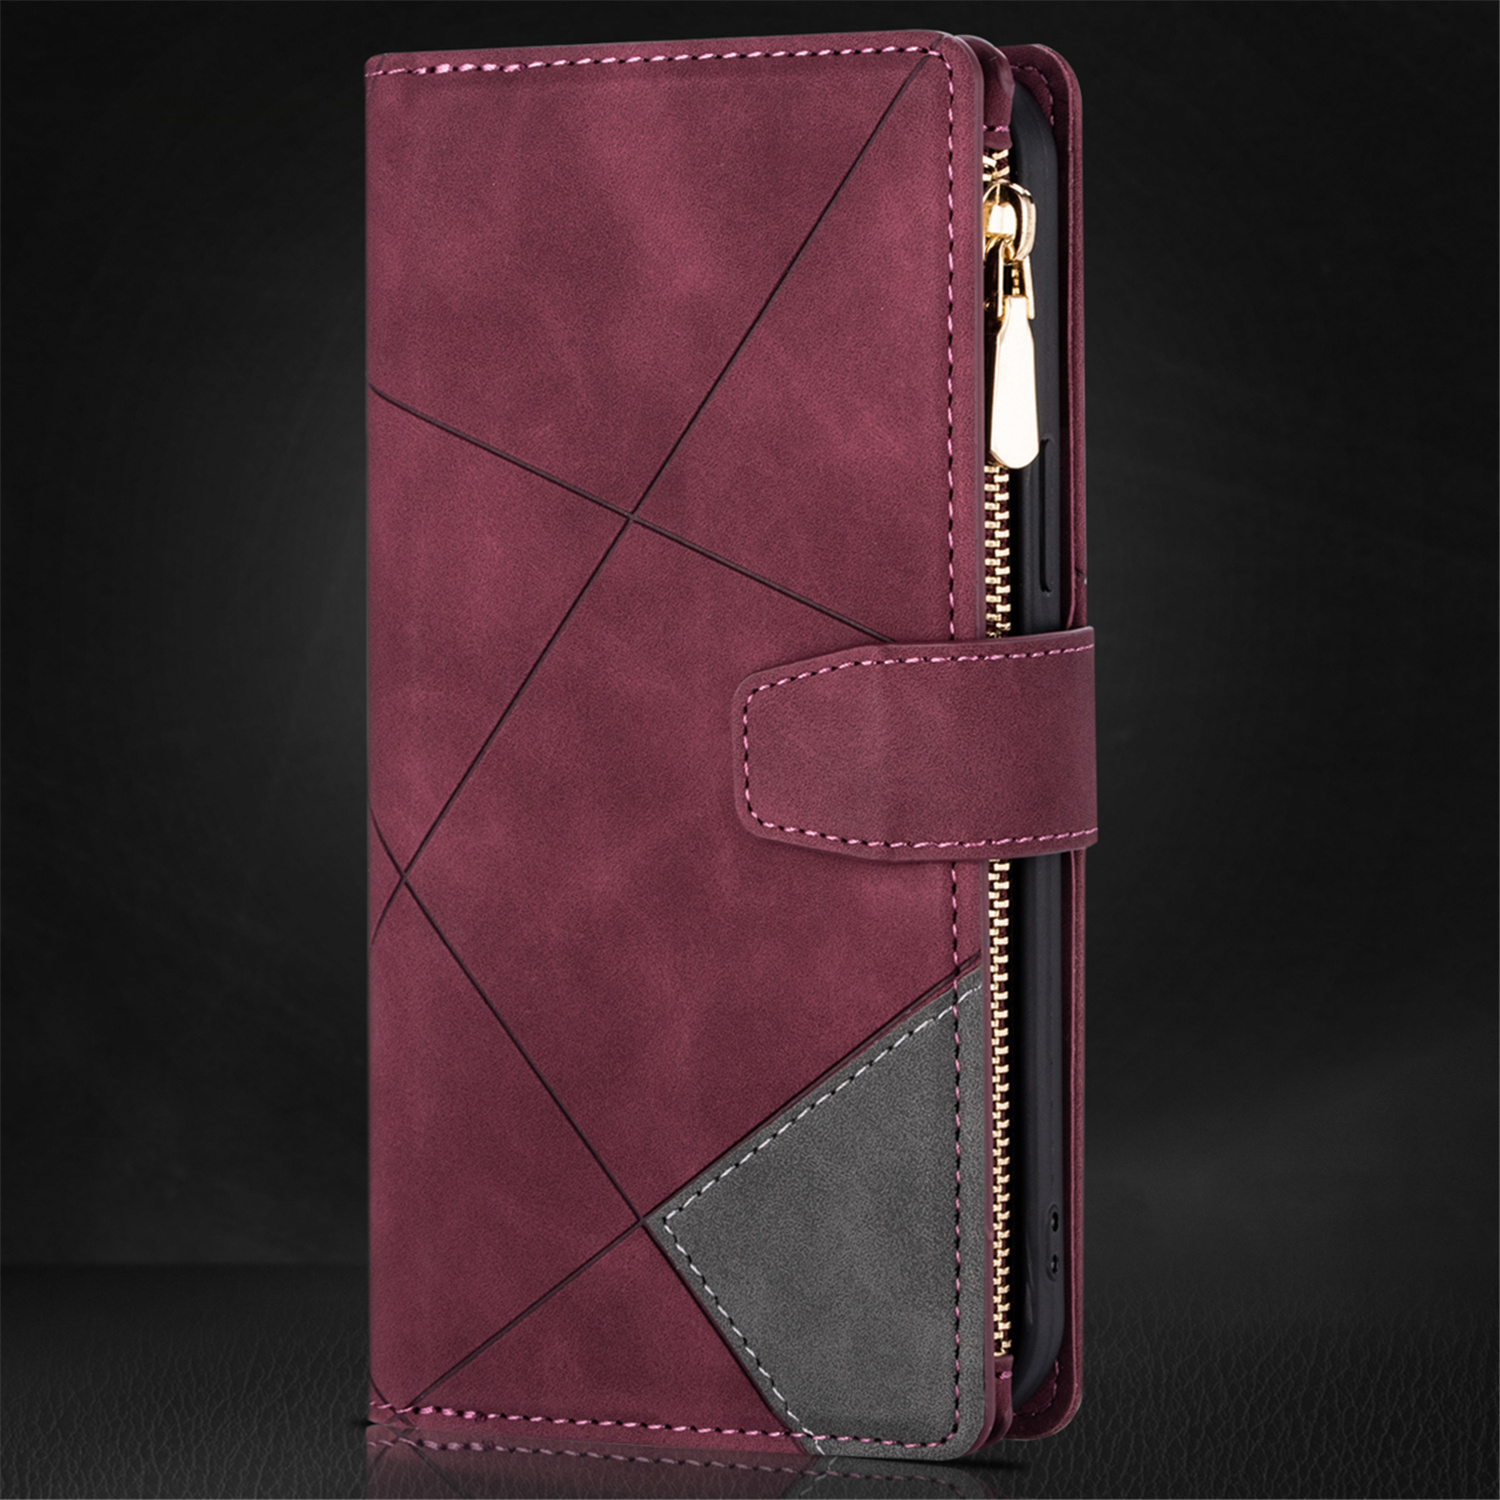 Tarise for Samsung Galaxy S21 Plus 5G Case Zipper Wallet with 9 Card Holder, S21+ Case for Women Men, Strap Wristlet Wristband Magnetic Kickstand Flip Phone Cover for Samsung S21 Plus 5G 6.7", Winered - image 2 of 9